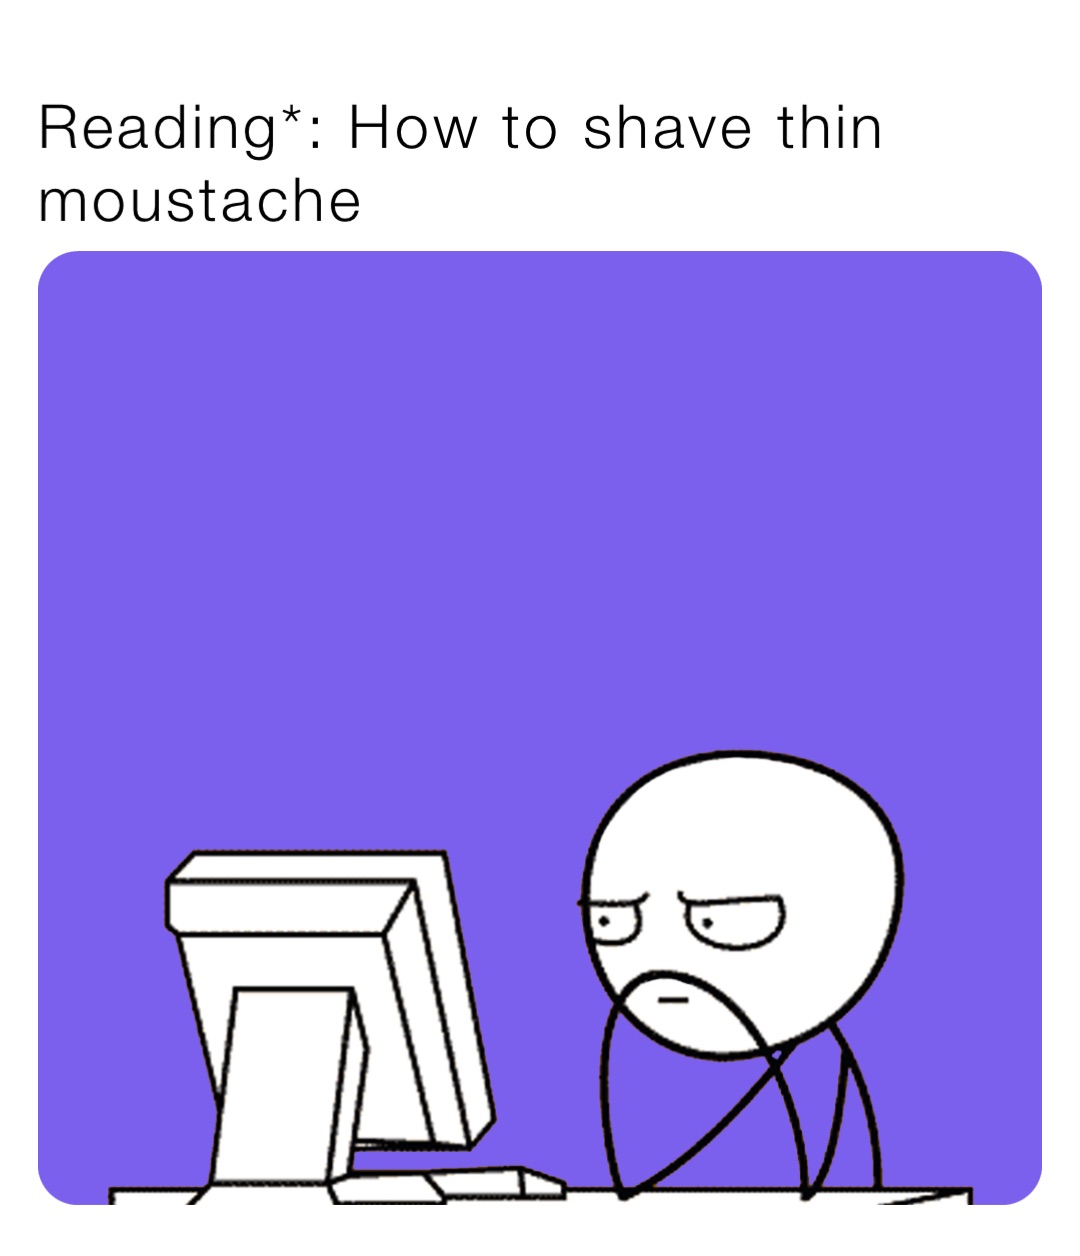 Reading*: How to shave thin moustache